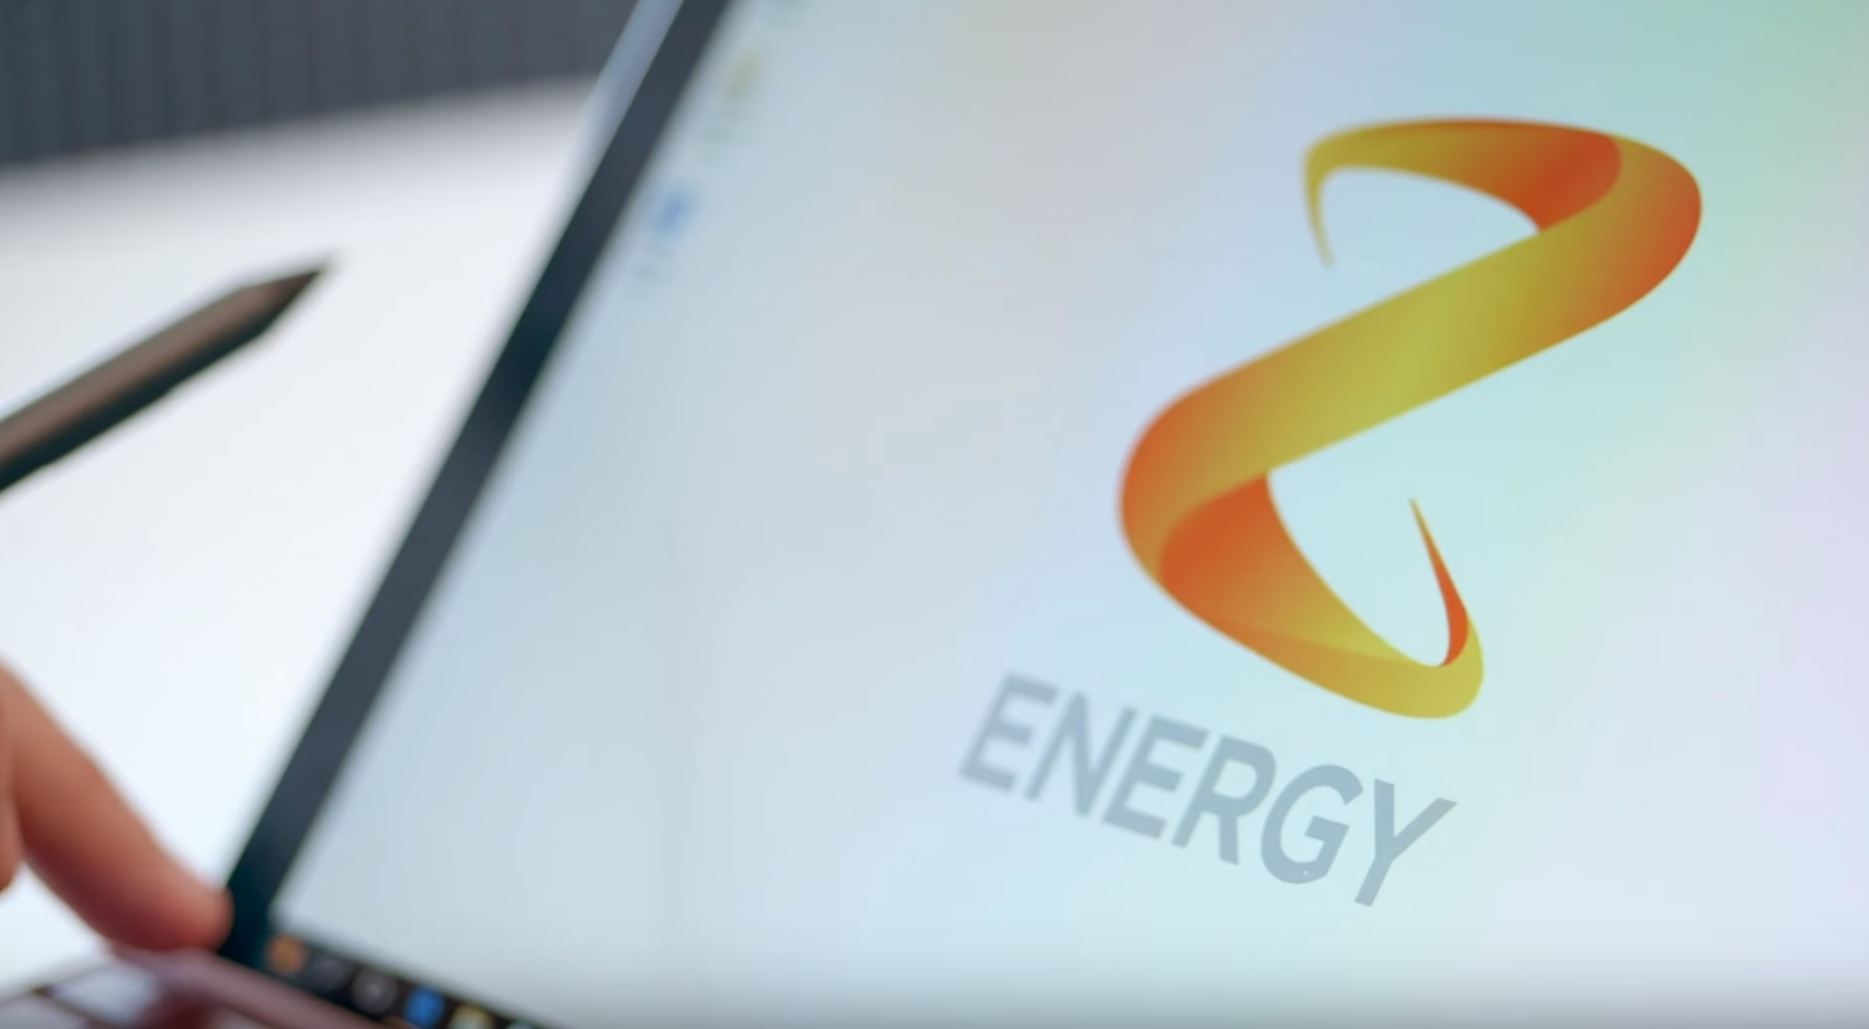 Z Energy, empowering their team to become collaboration pros